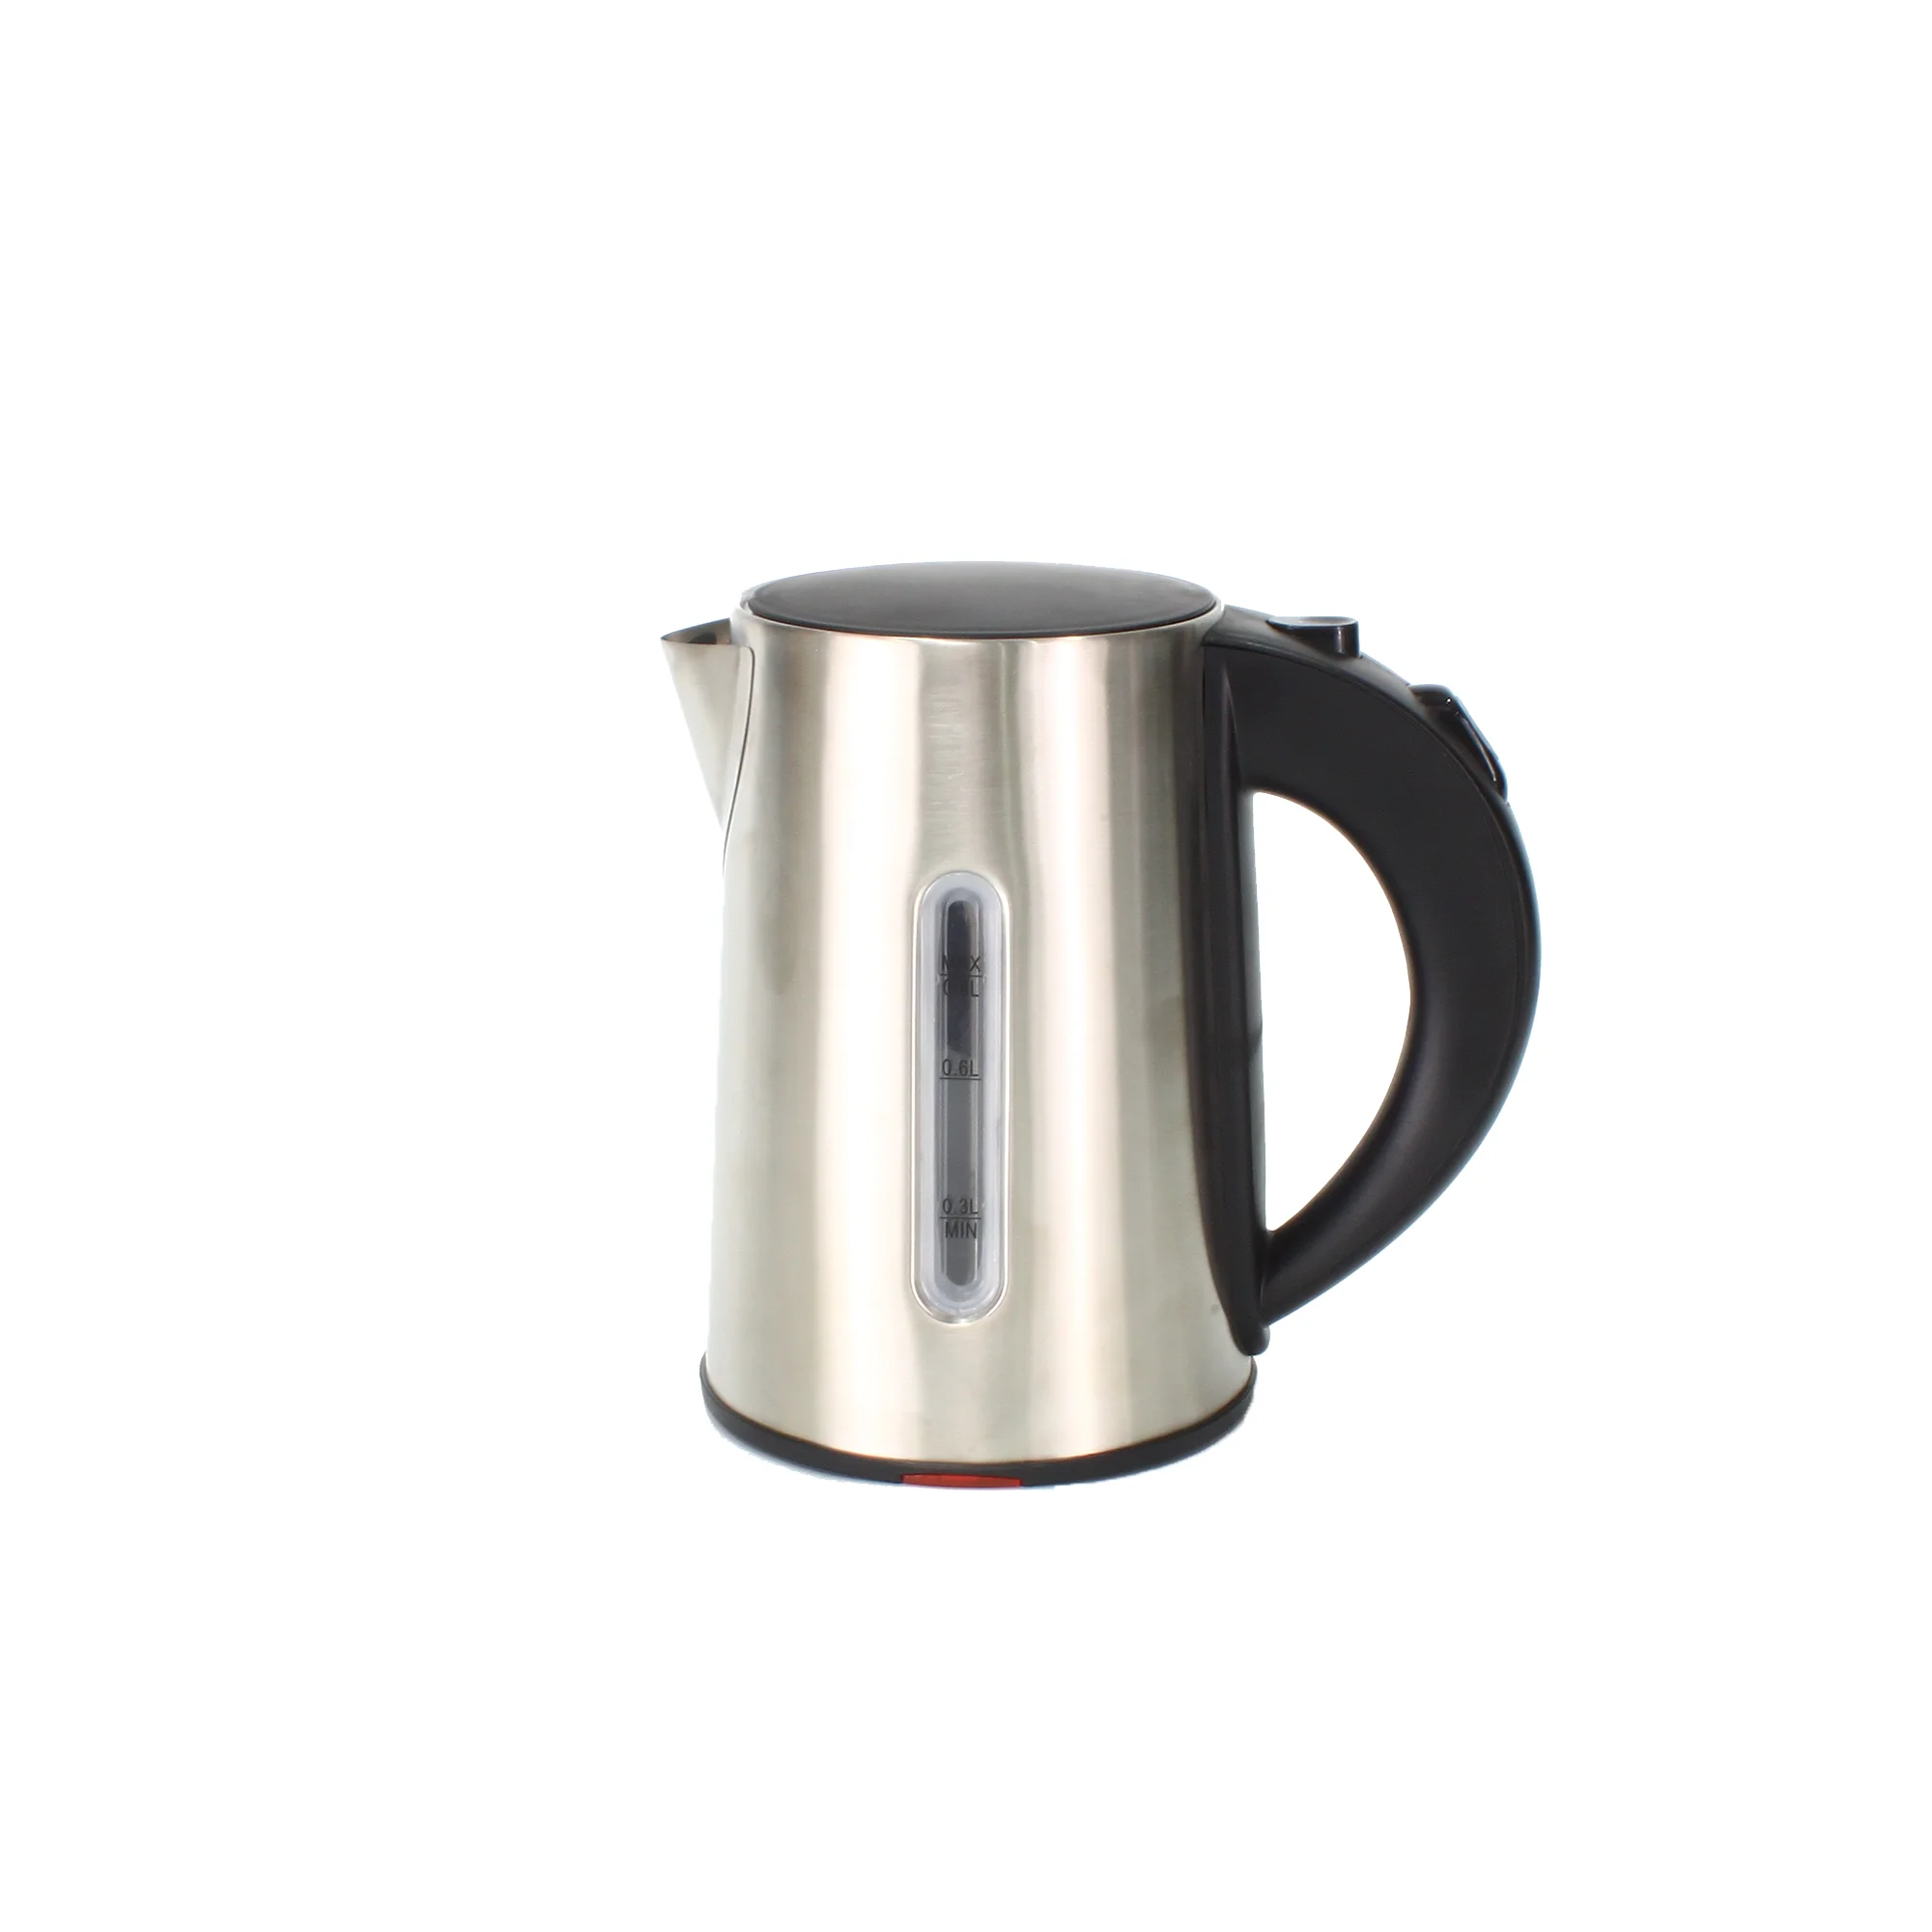 0.8L Electric Kettle Stainless Steel, 800 Watts Small Electric Kettle Fast  Boil